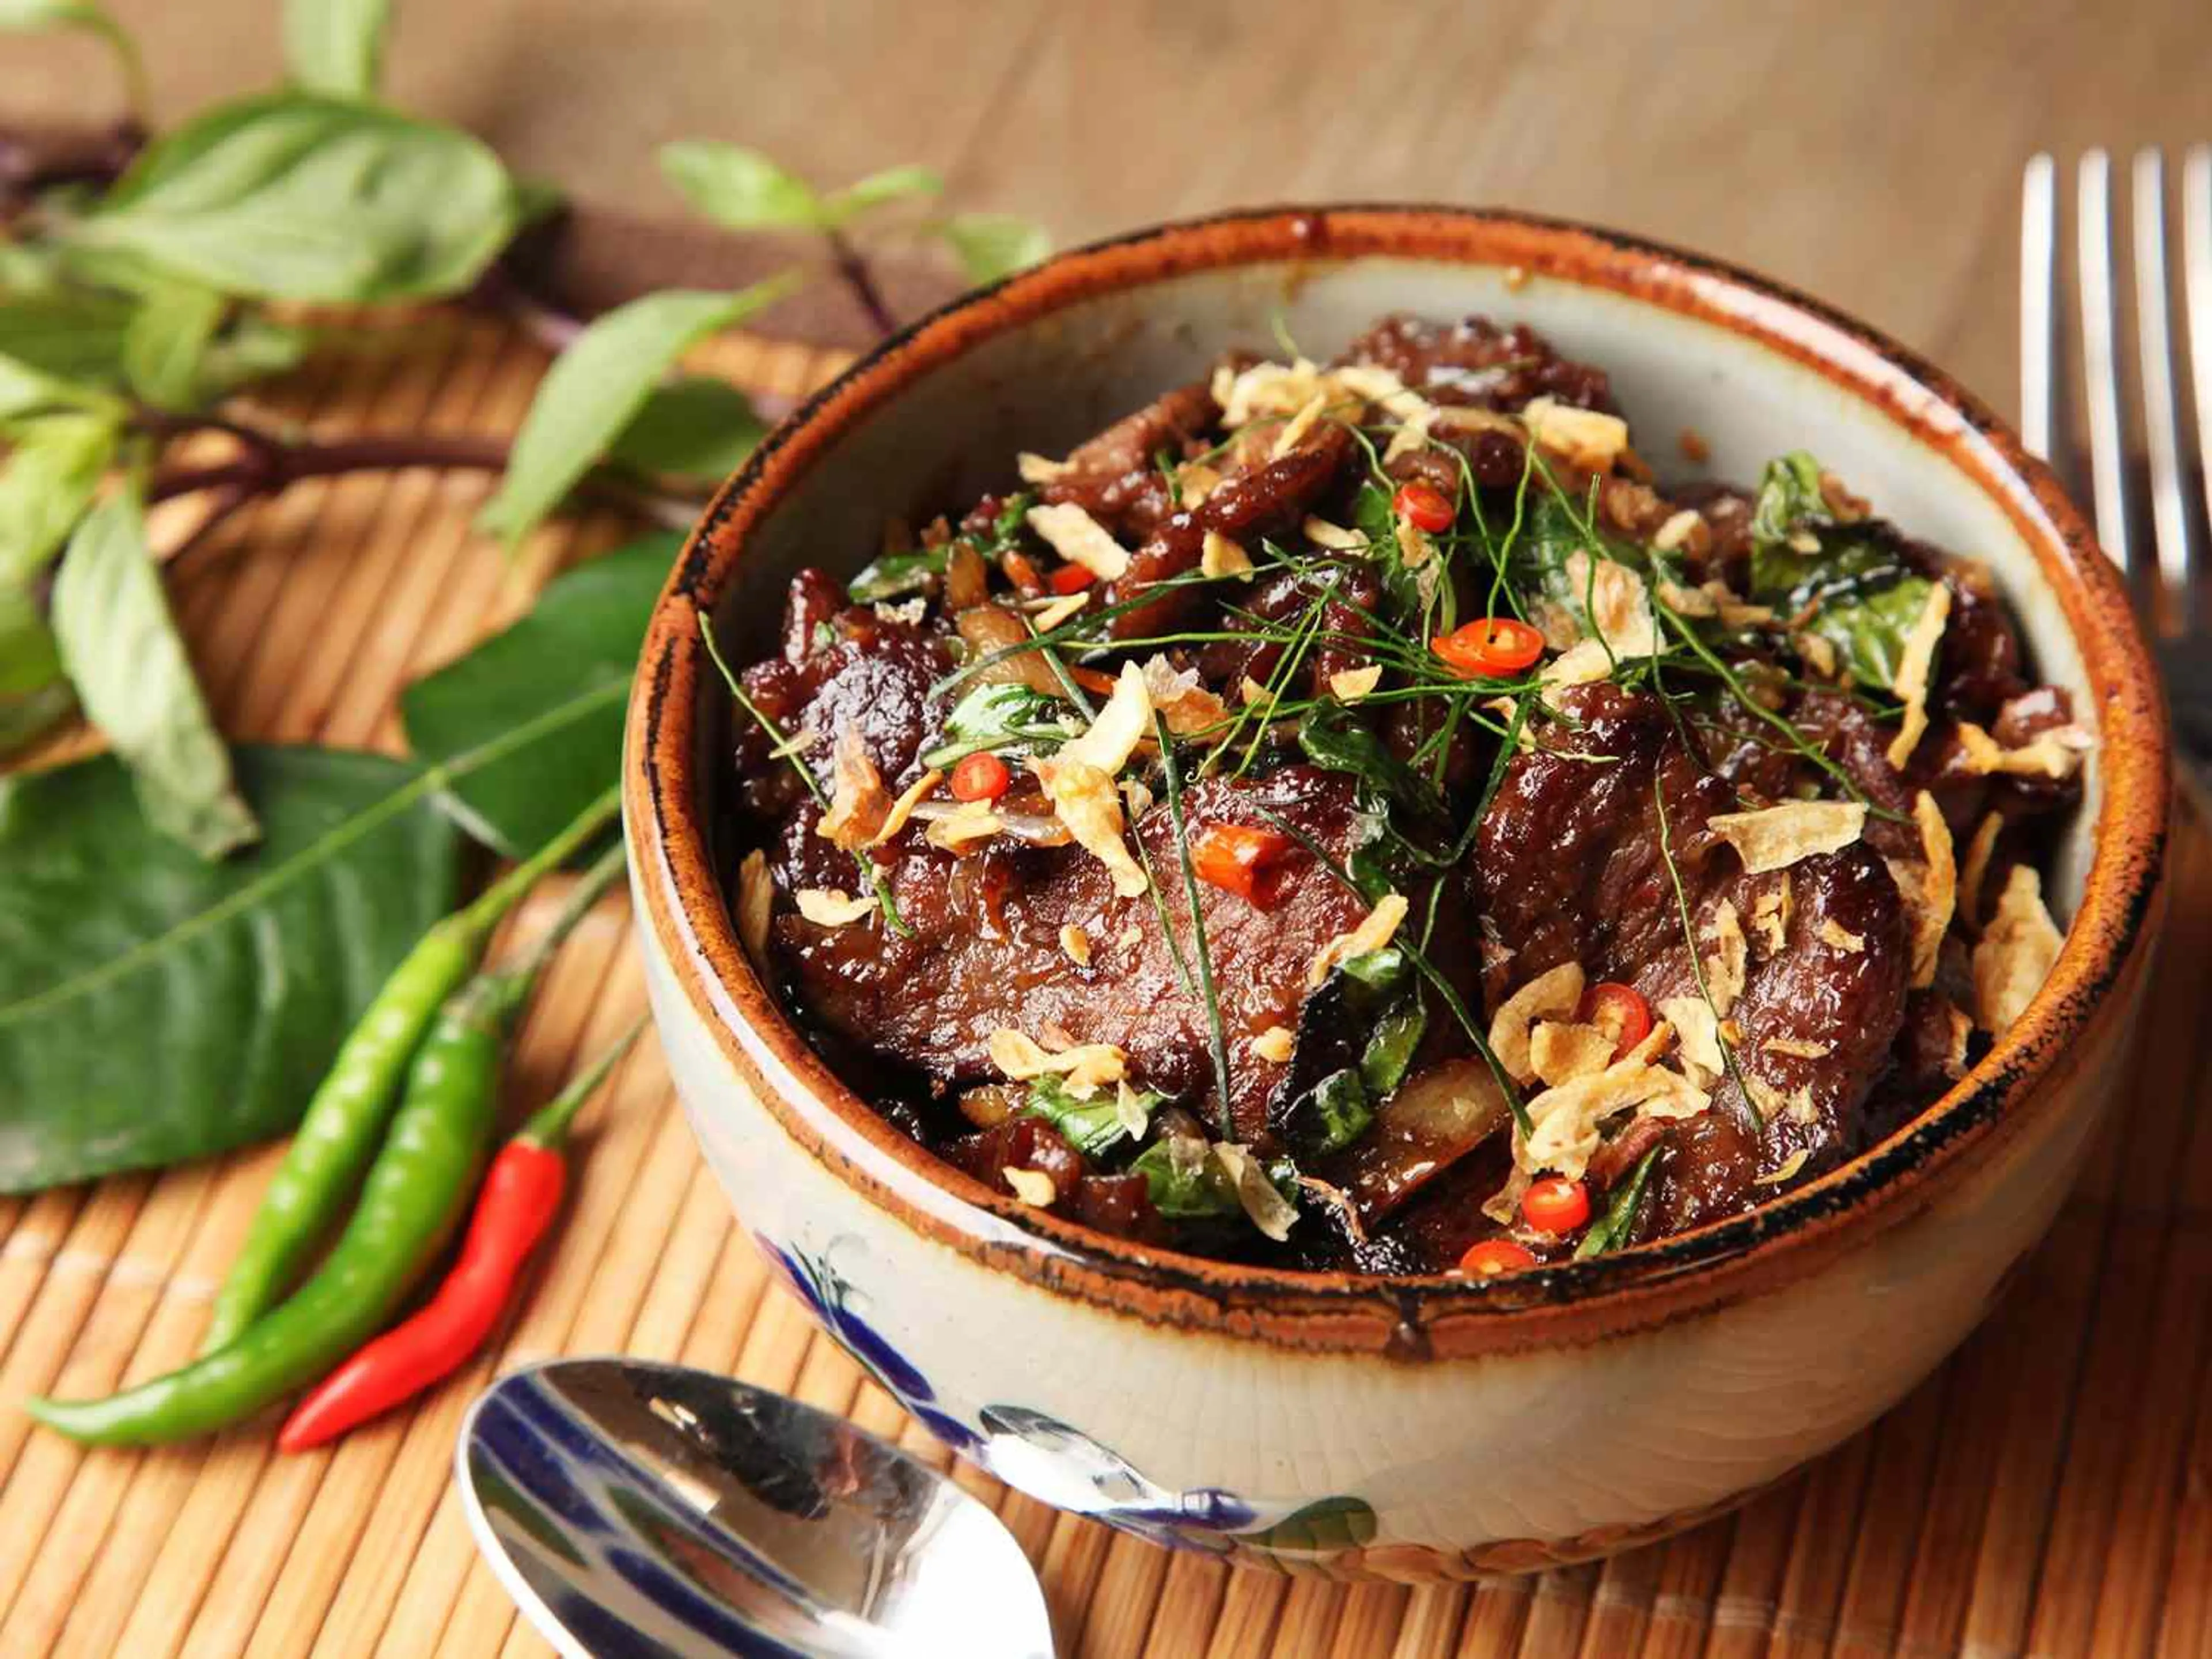 Phat Bai Horapha (Thai-Style Beef With Basil and Chiles)